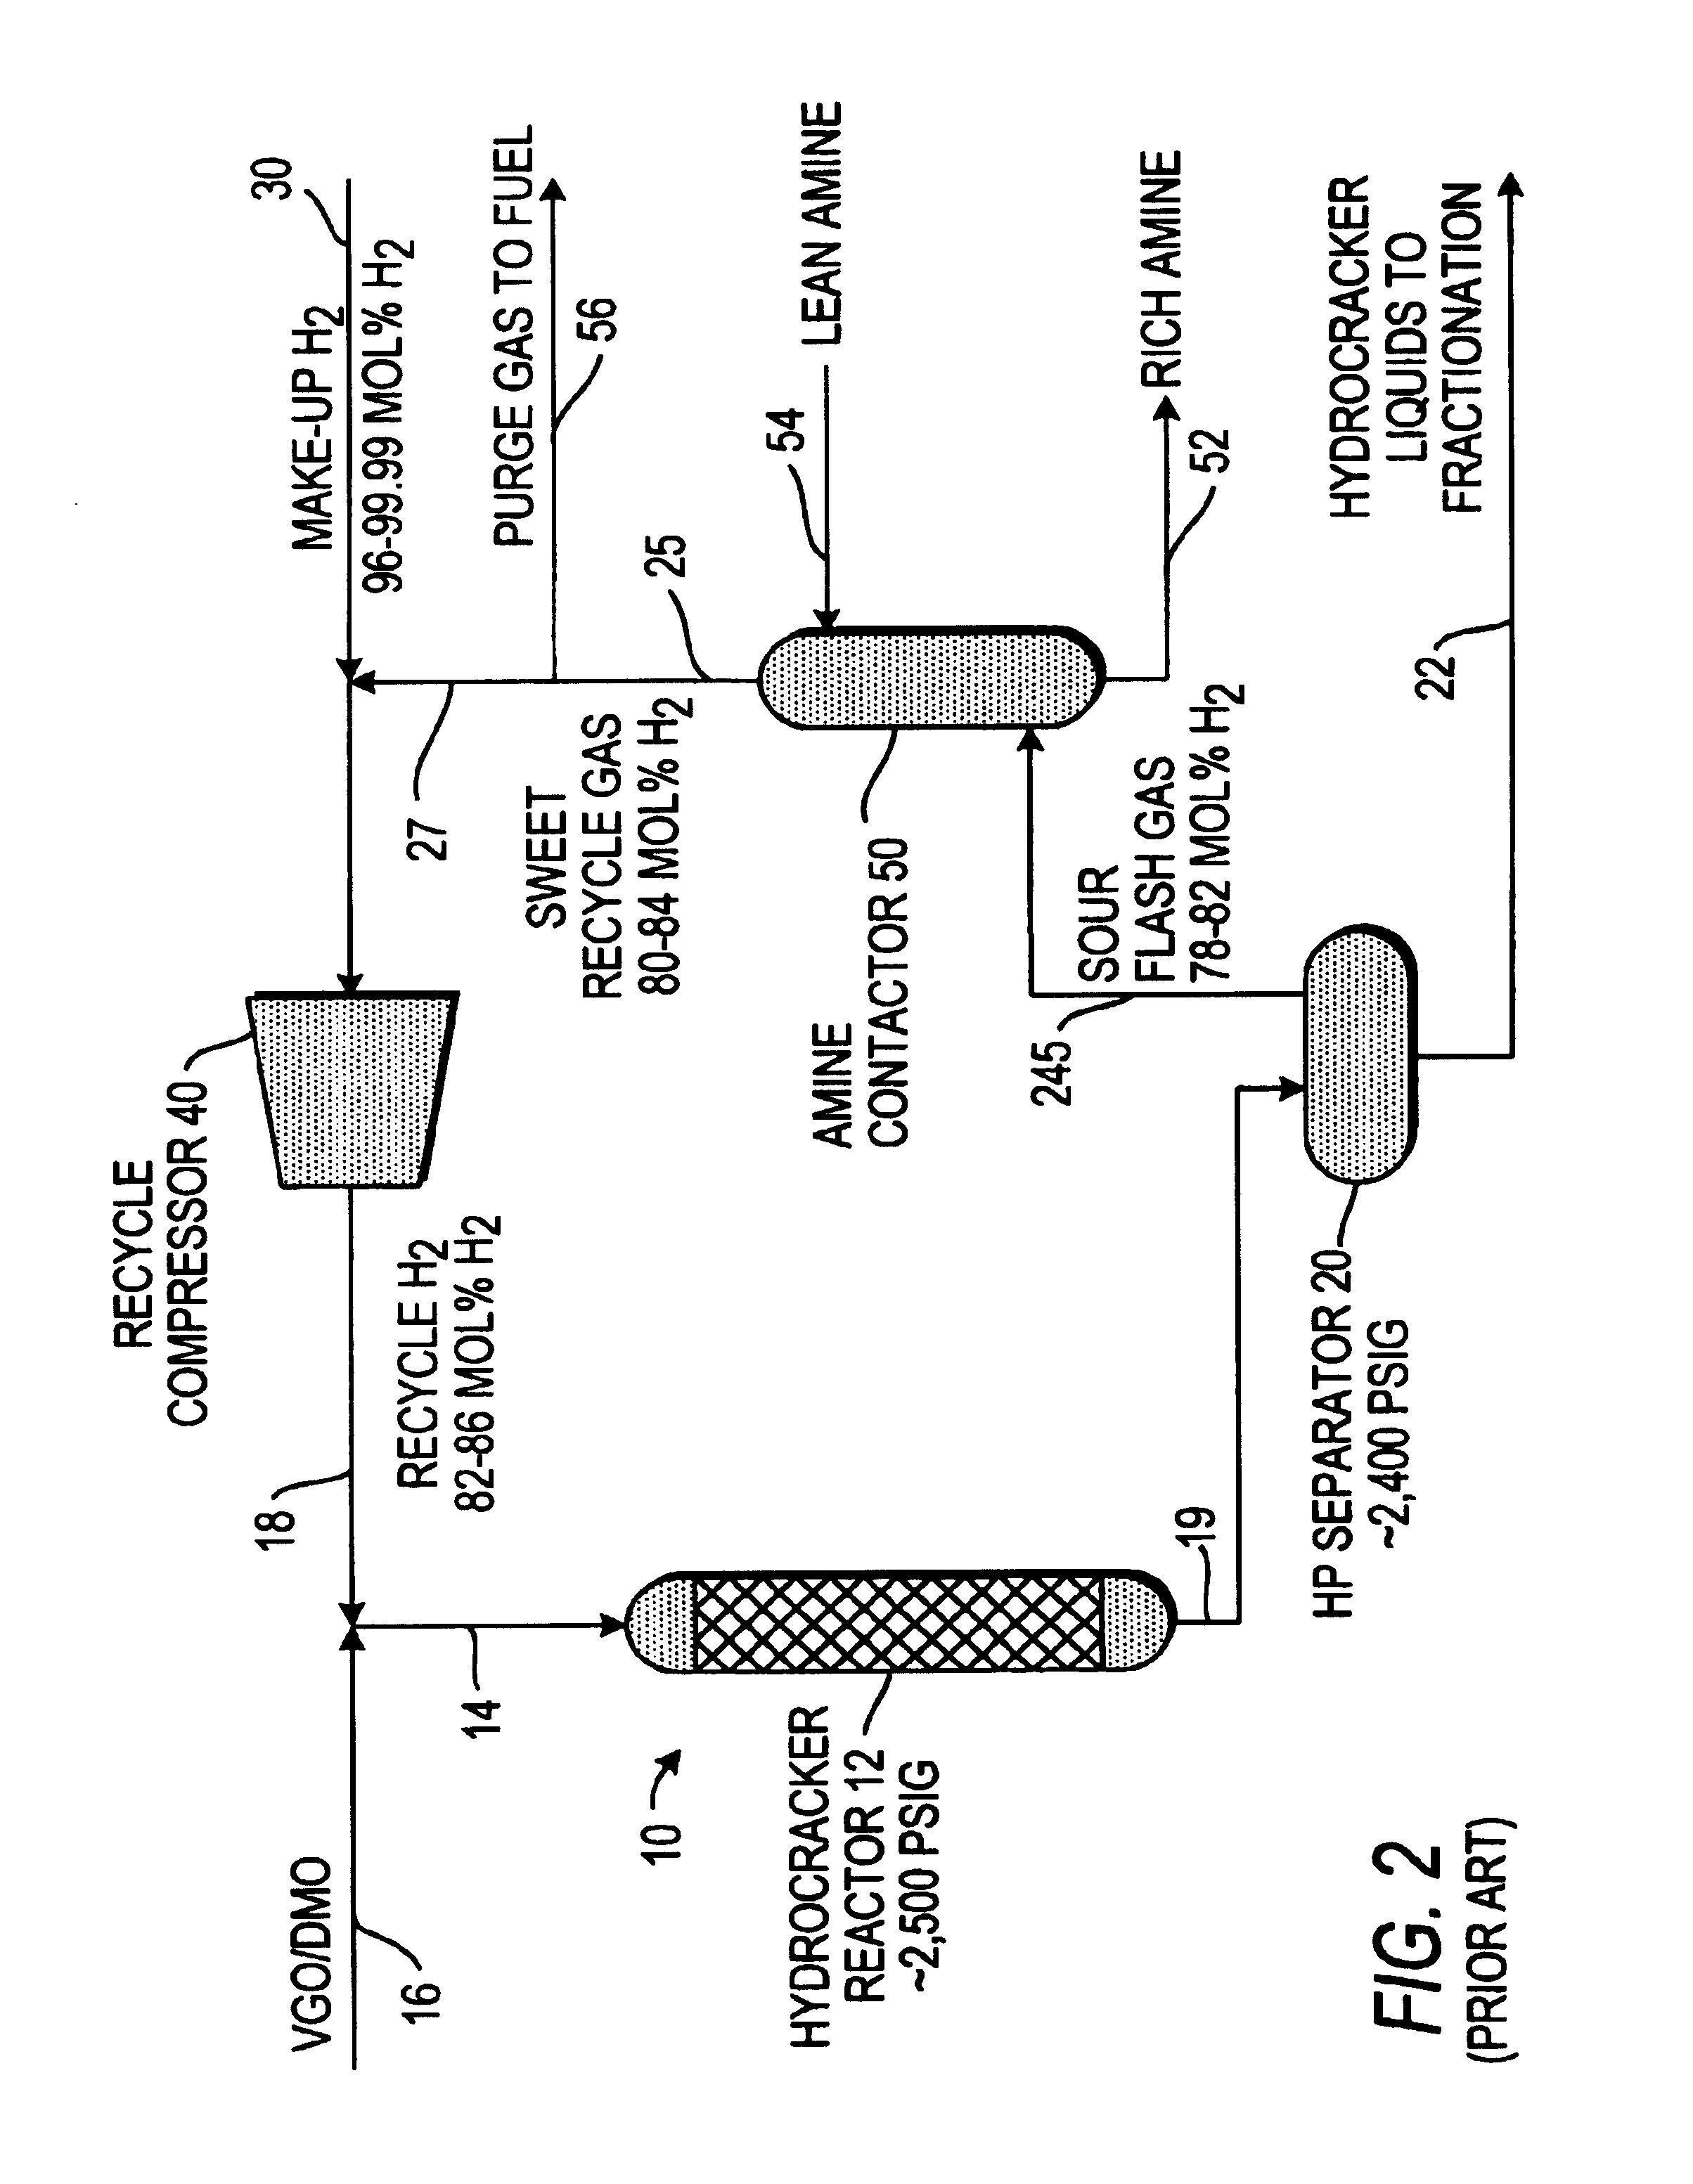 Enhanced hydrogen recovery for hydroprocessing units